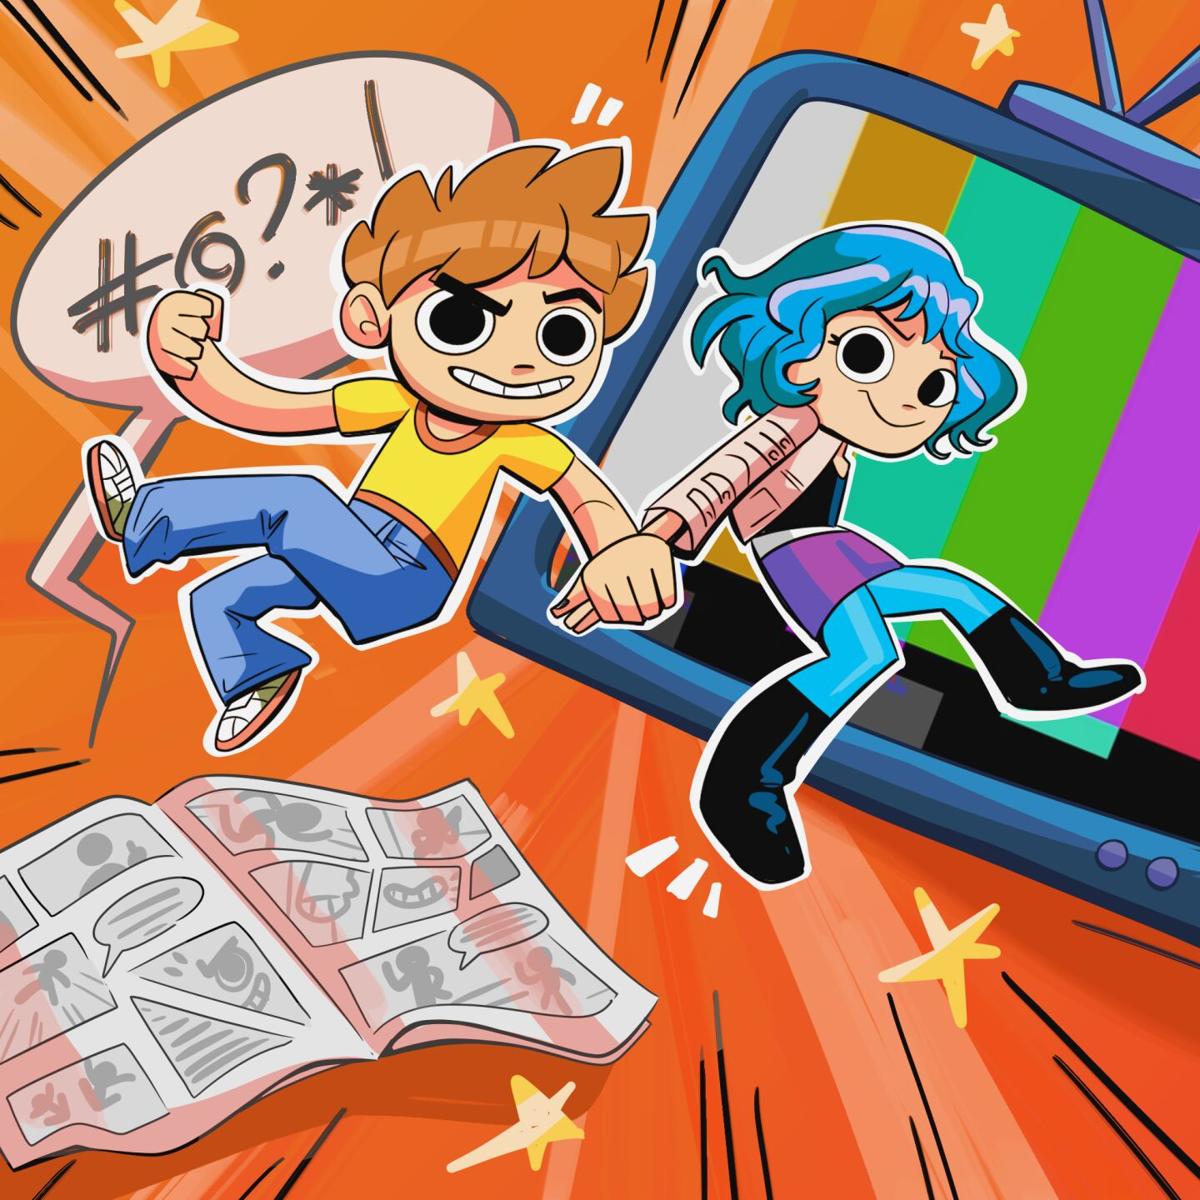 Scott Pilgrim Takes Off': What to Watch Next From the Science Saru